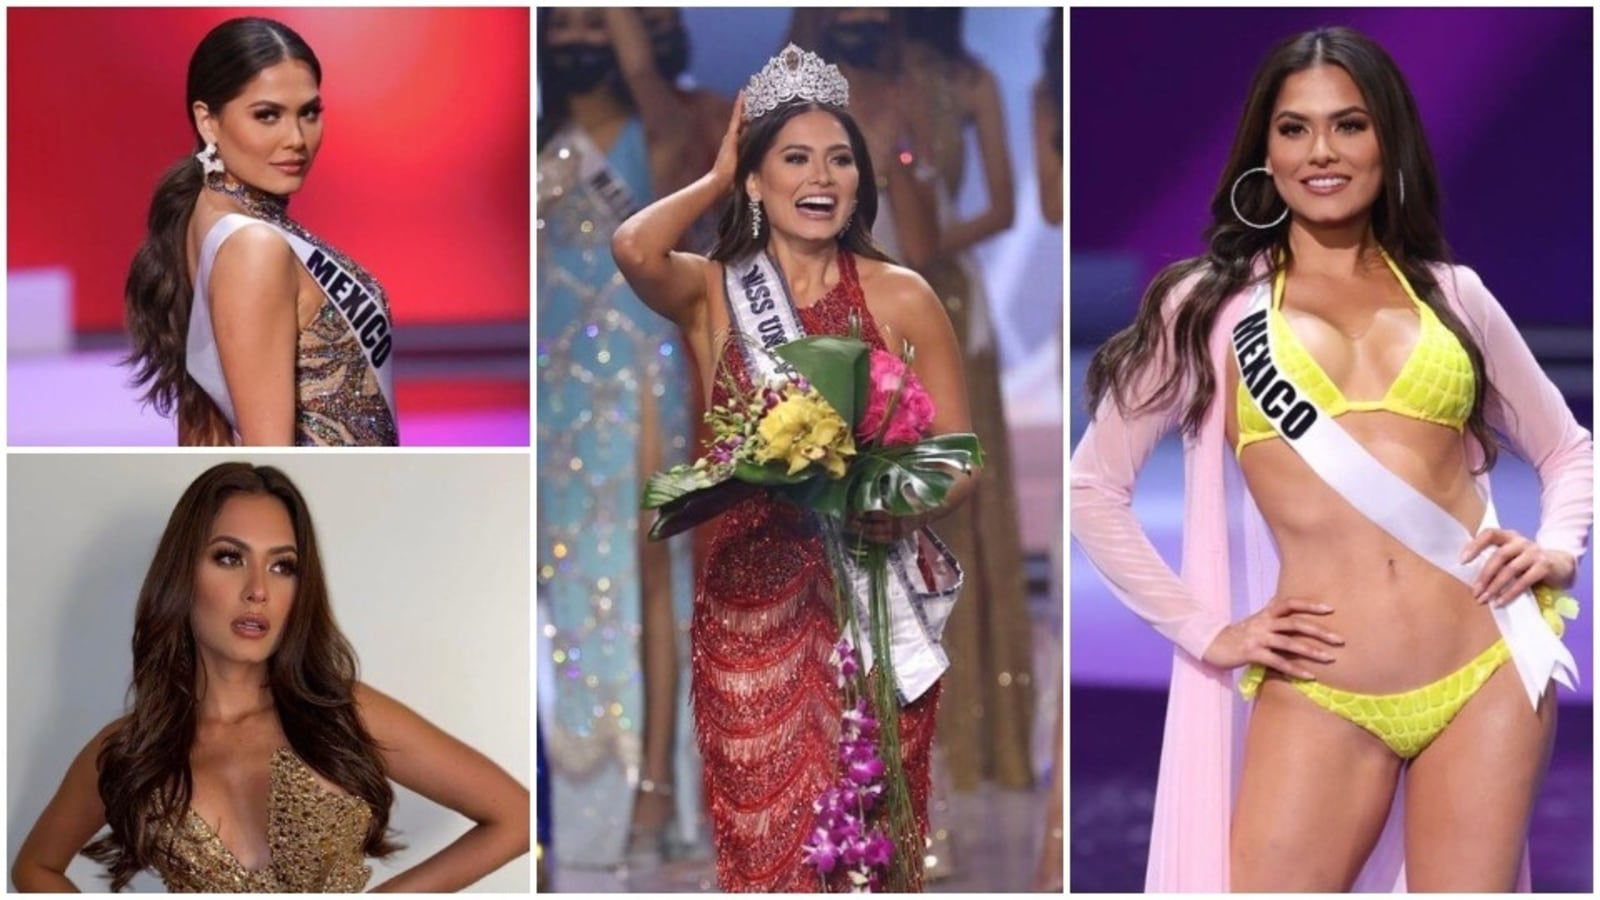 Miss Universe 2020 Andrea Meza's 7 best pictures from her pageant journey